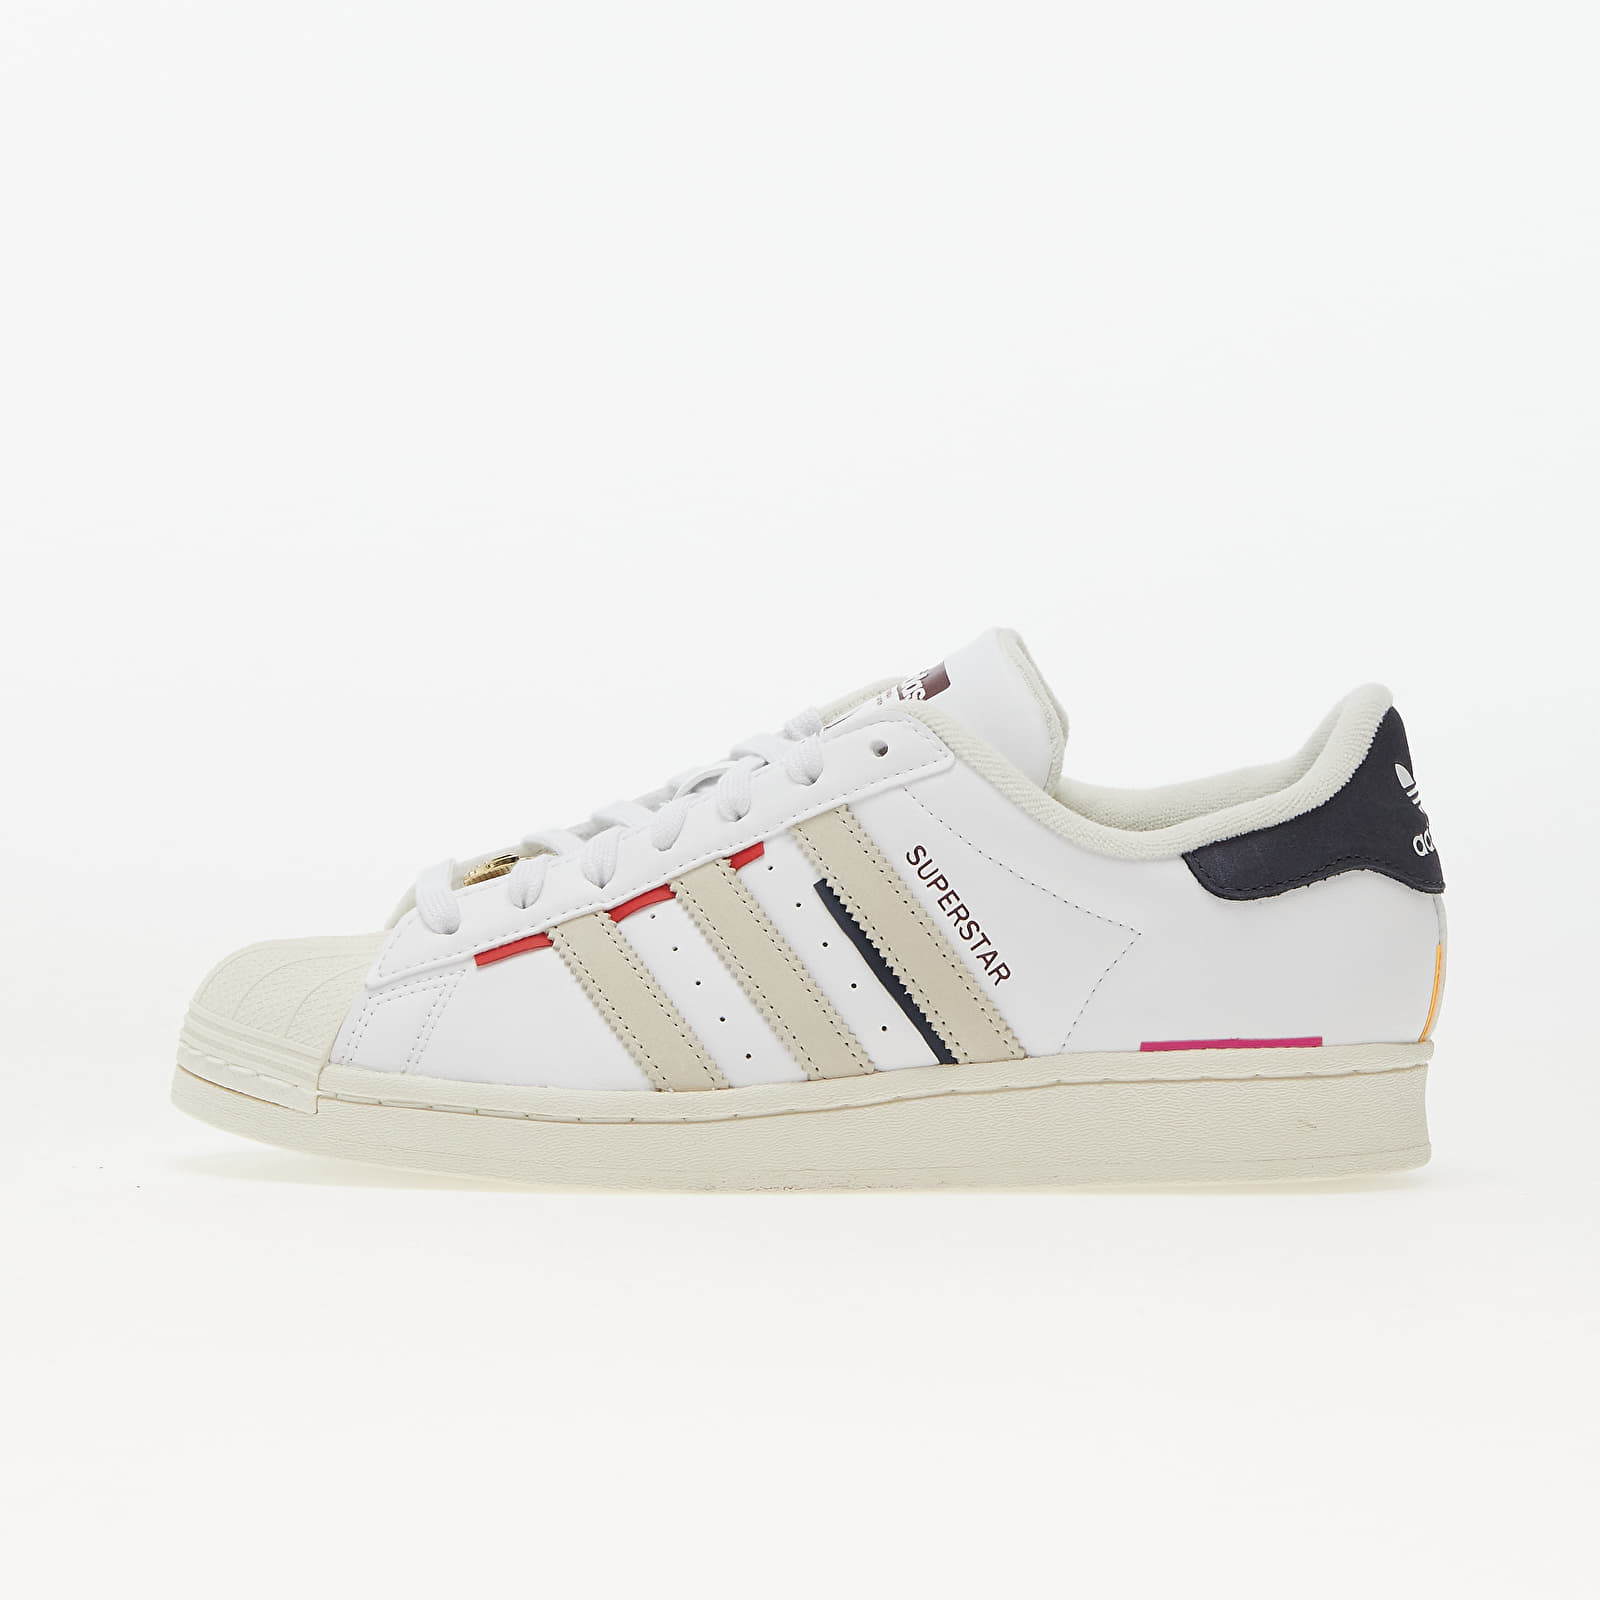 Women's sneakers and shoes adidas Originals Superstar W Ftw White/ Aluminium/ Shadow Navy